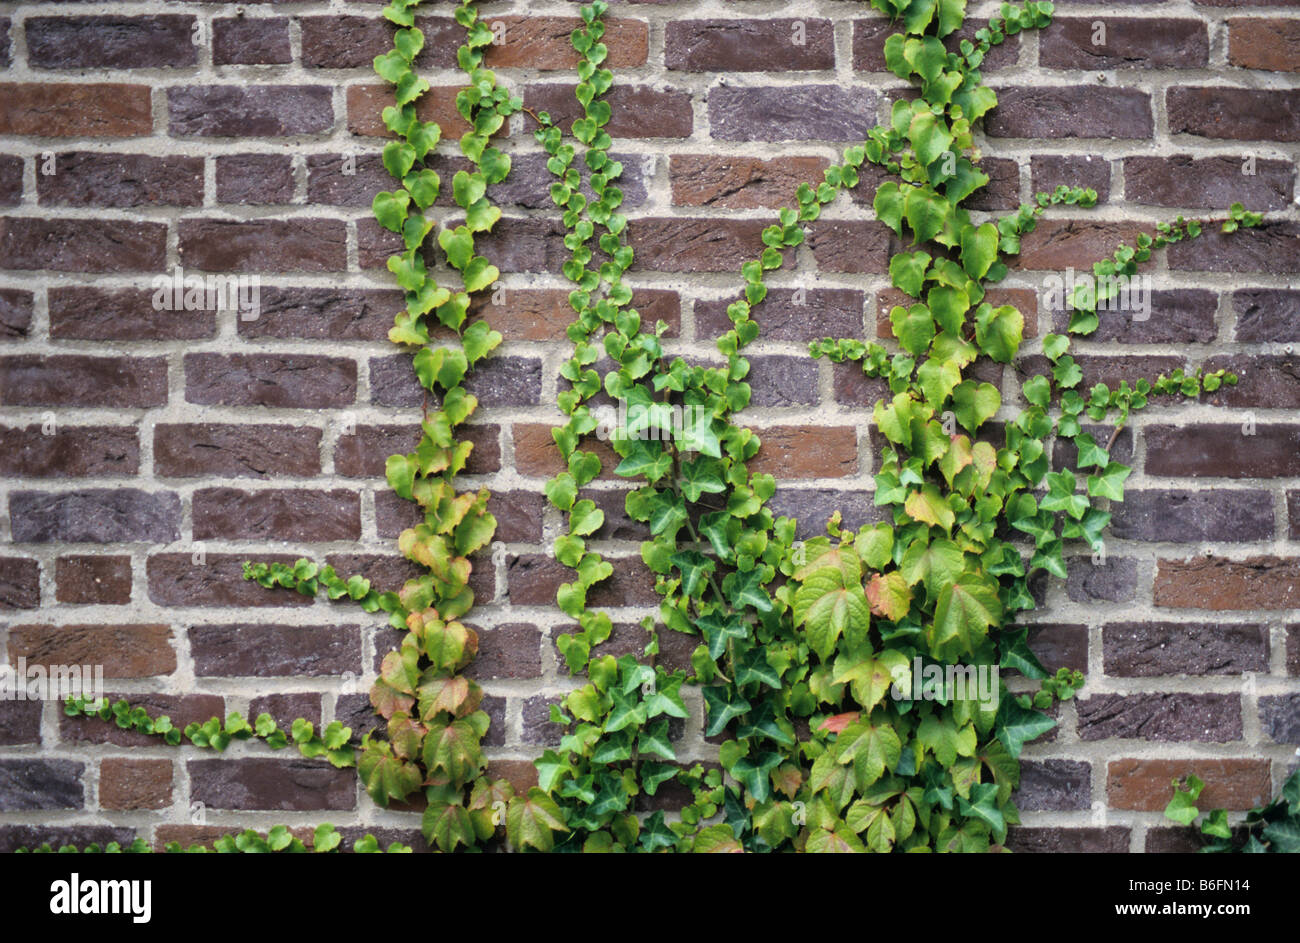 Common Ivy (Hedera helix) and Japanese Ivy (Parthenocissus tricuspidata) growing on a brick wall Stock Photo